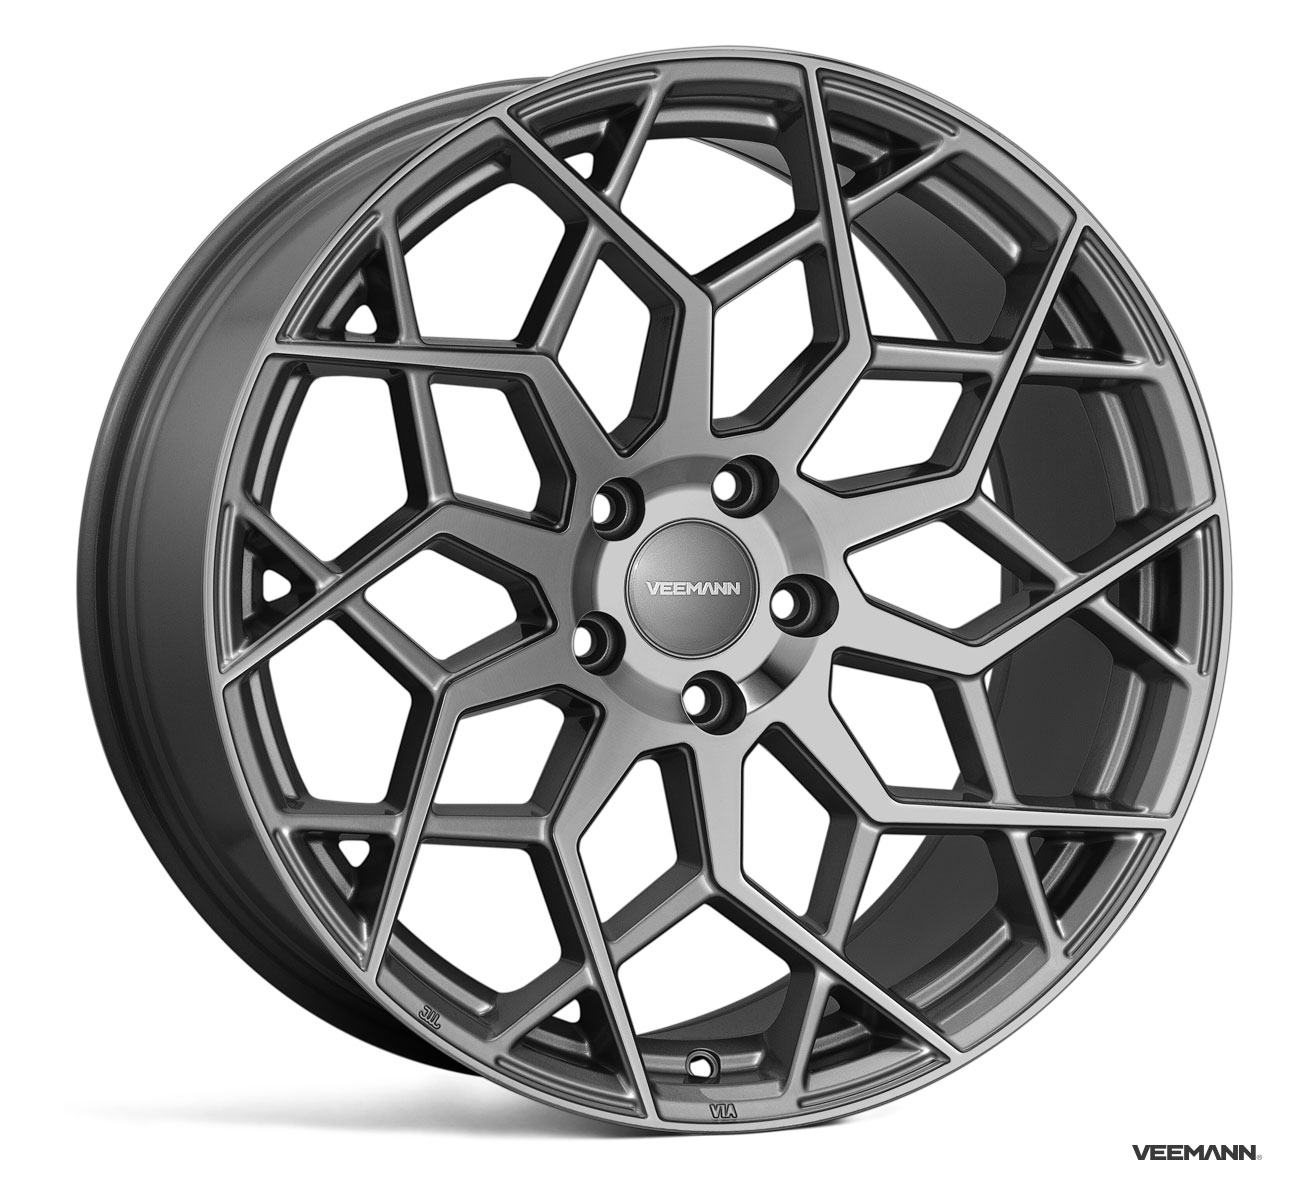 NEW 19" VEEMANN V-FS42 ALLOY WHEELS IN GLOSS GRAPHITE WITH WIDER 9.5" REARS ET42/42